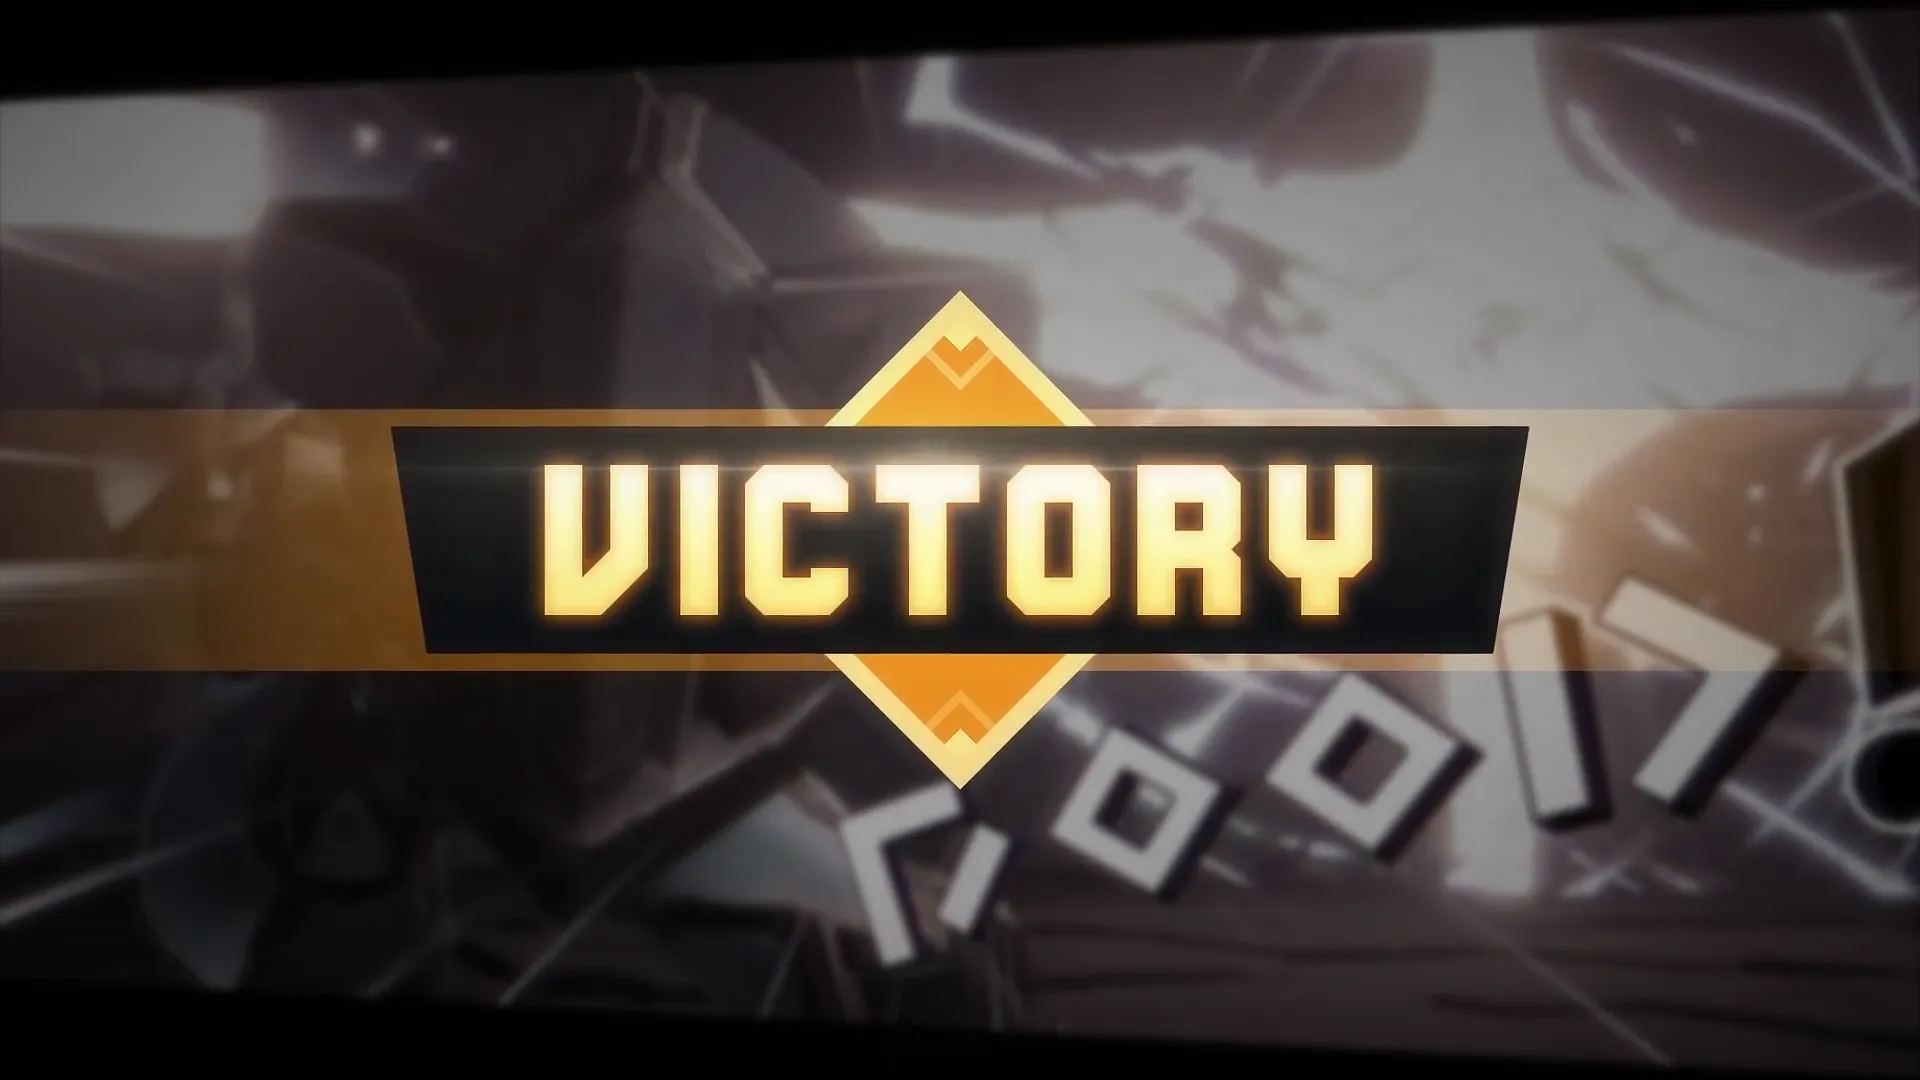 This Apeiron photo captures the Victory poster that players receive after successfully finishing a match against various enemies in the game.